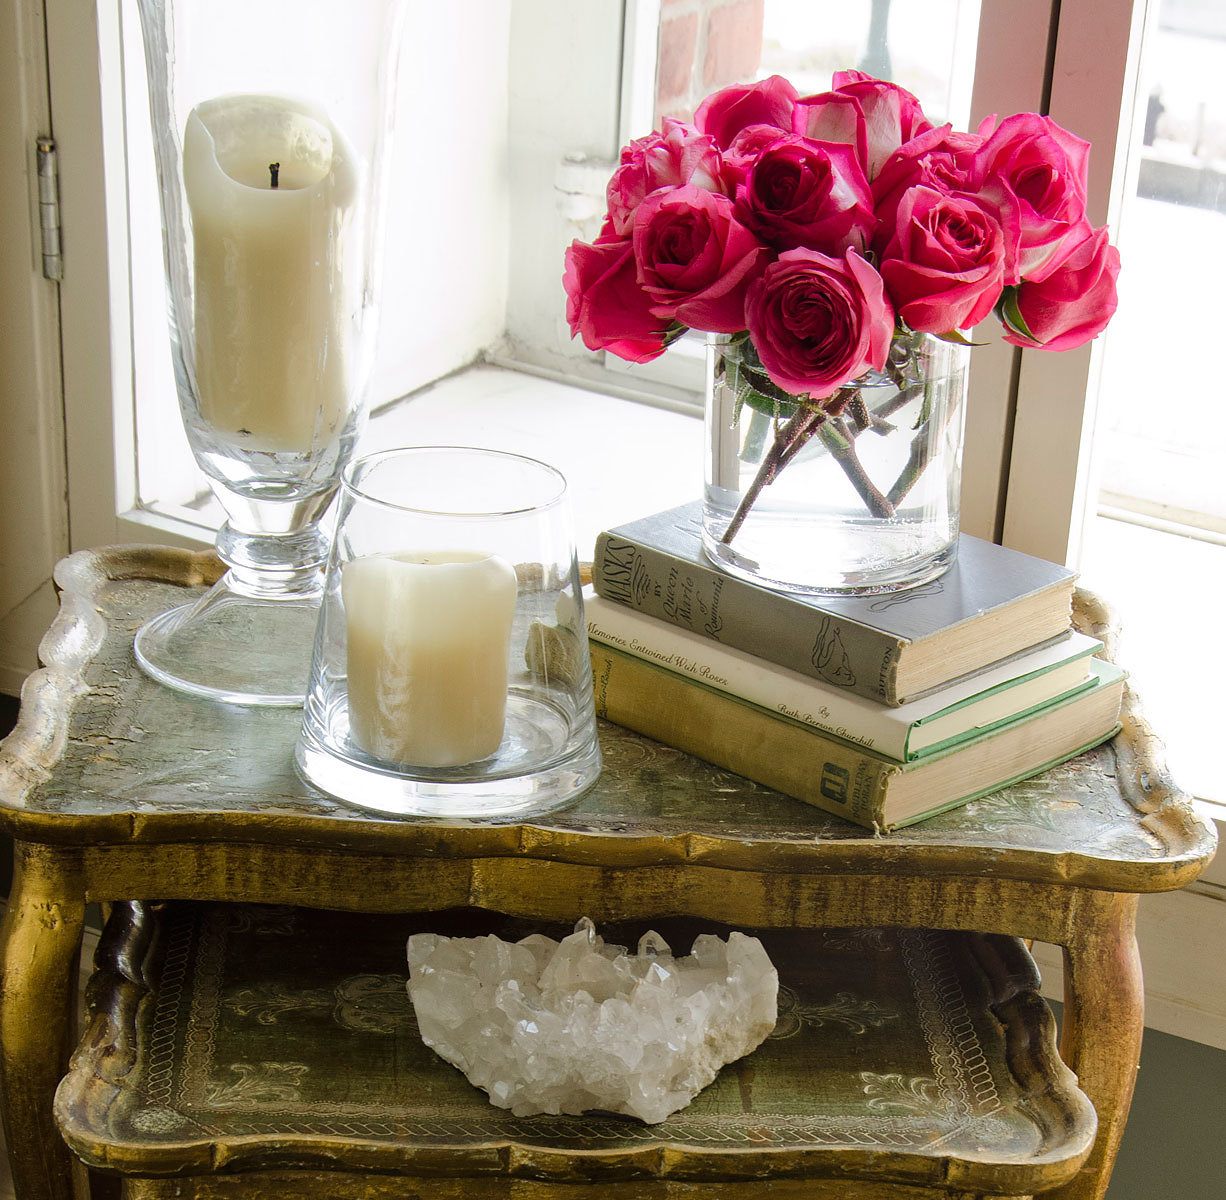 Erin Fetherston roses on table Tribeca home in Vogue